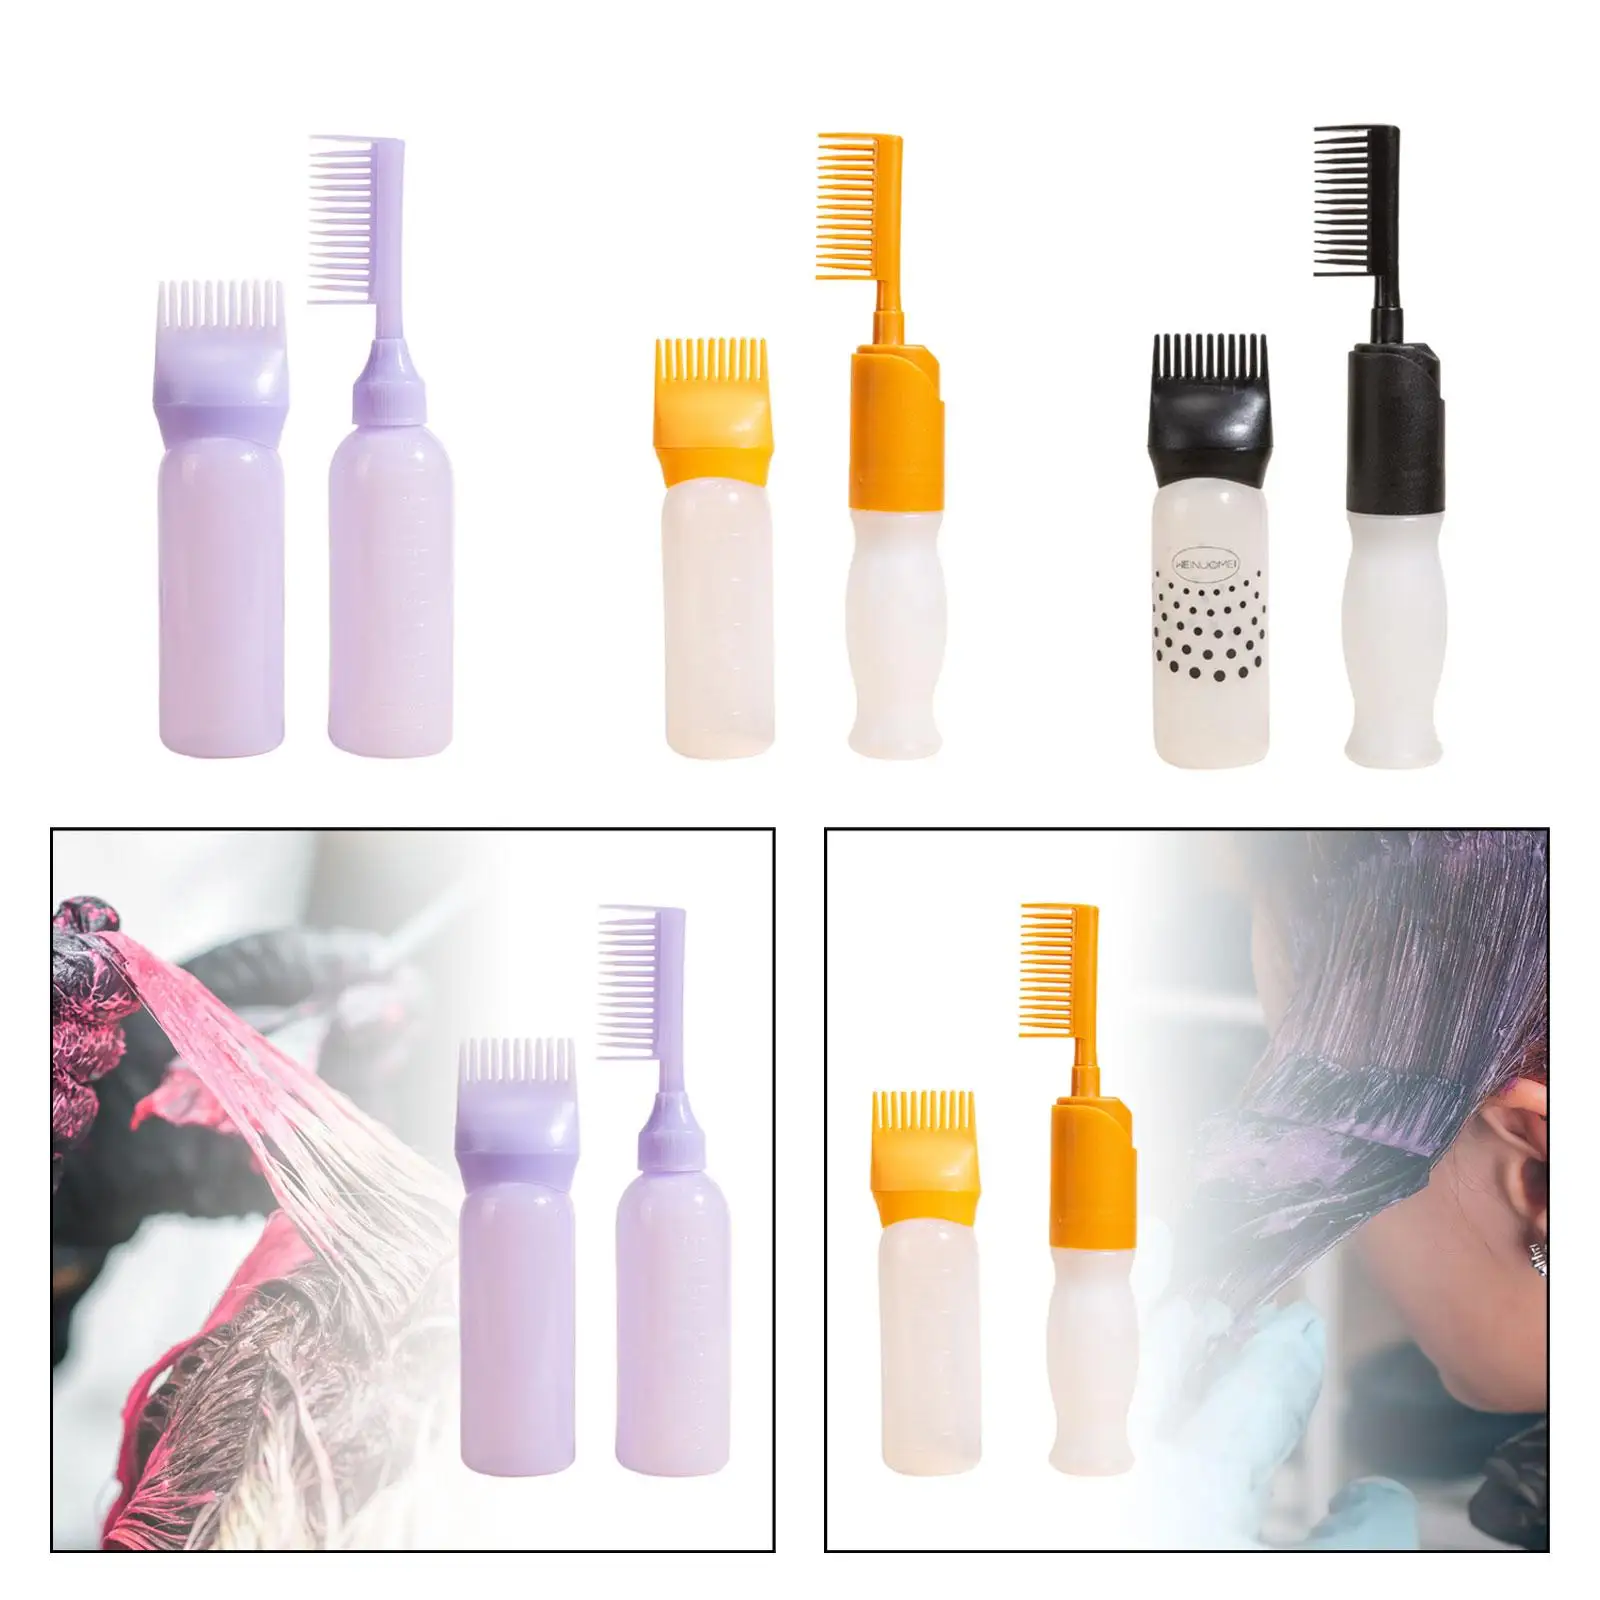 2x Root Comb Applicator Bottle 120ml Hairdressing Styling Tool Refillable Hair Dye Applicator Brush for Hair Care Easy to Clean